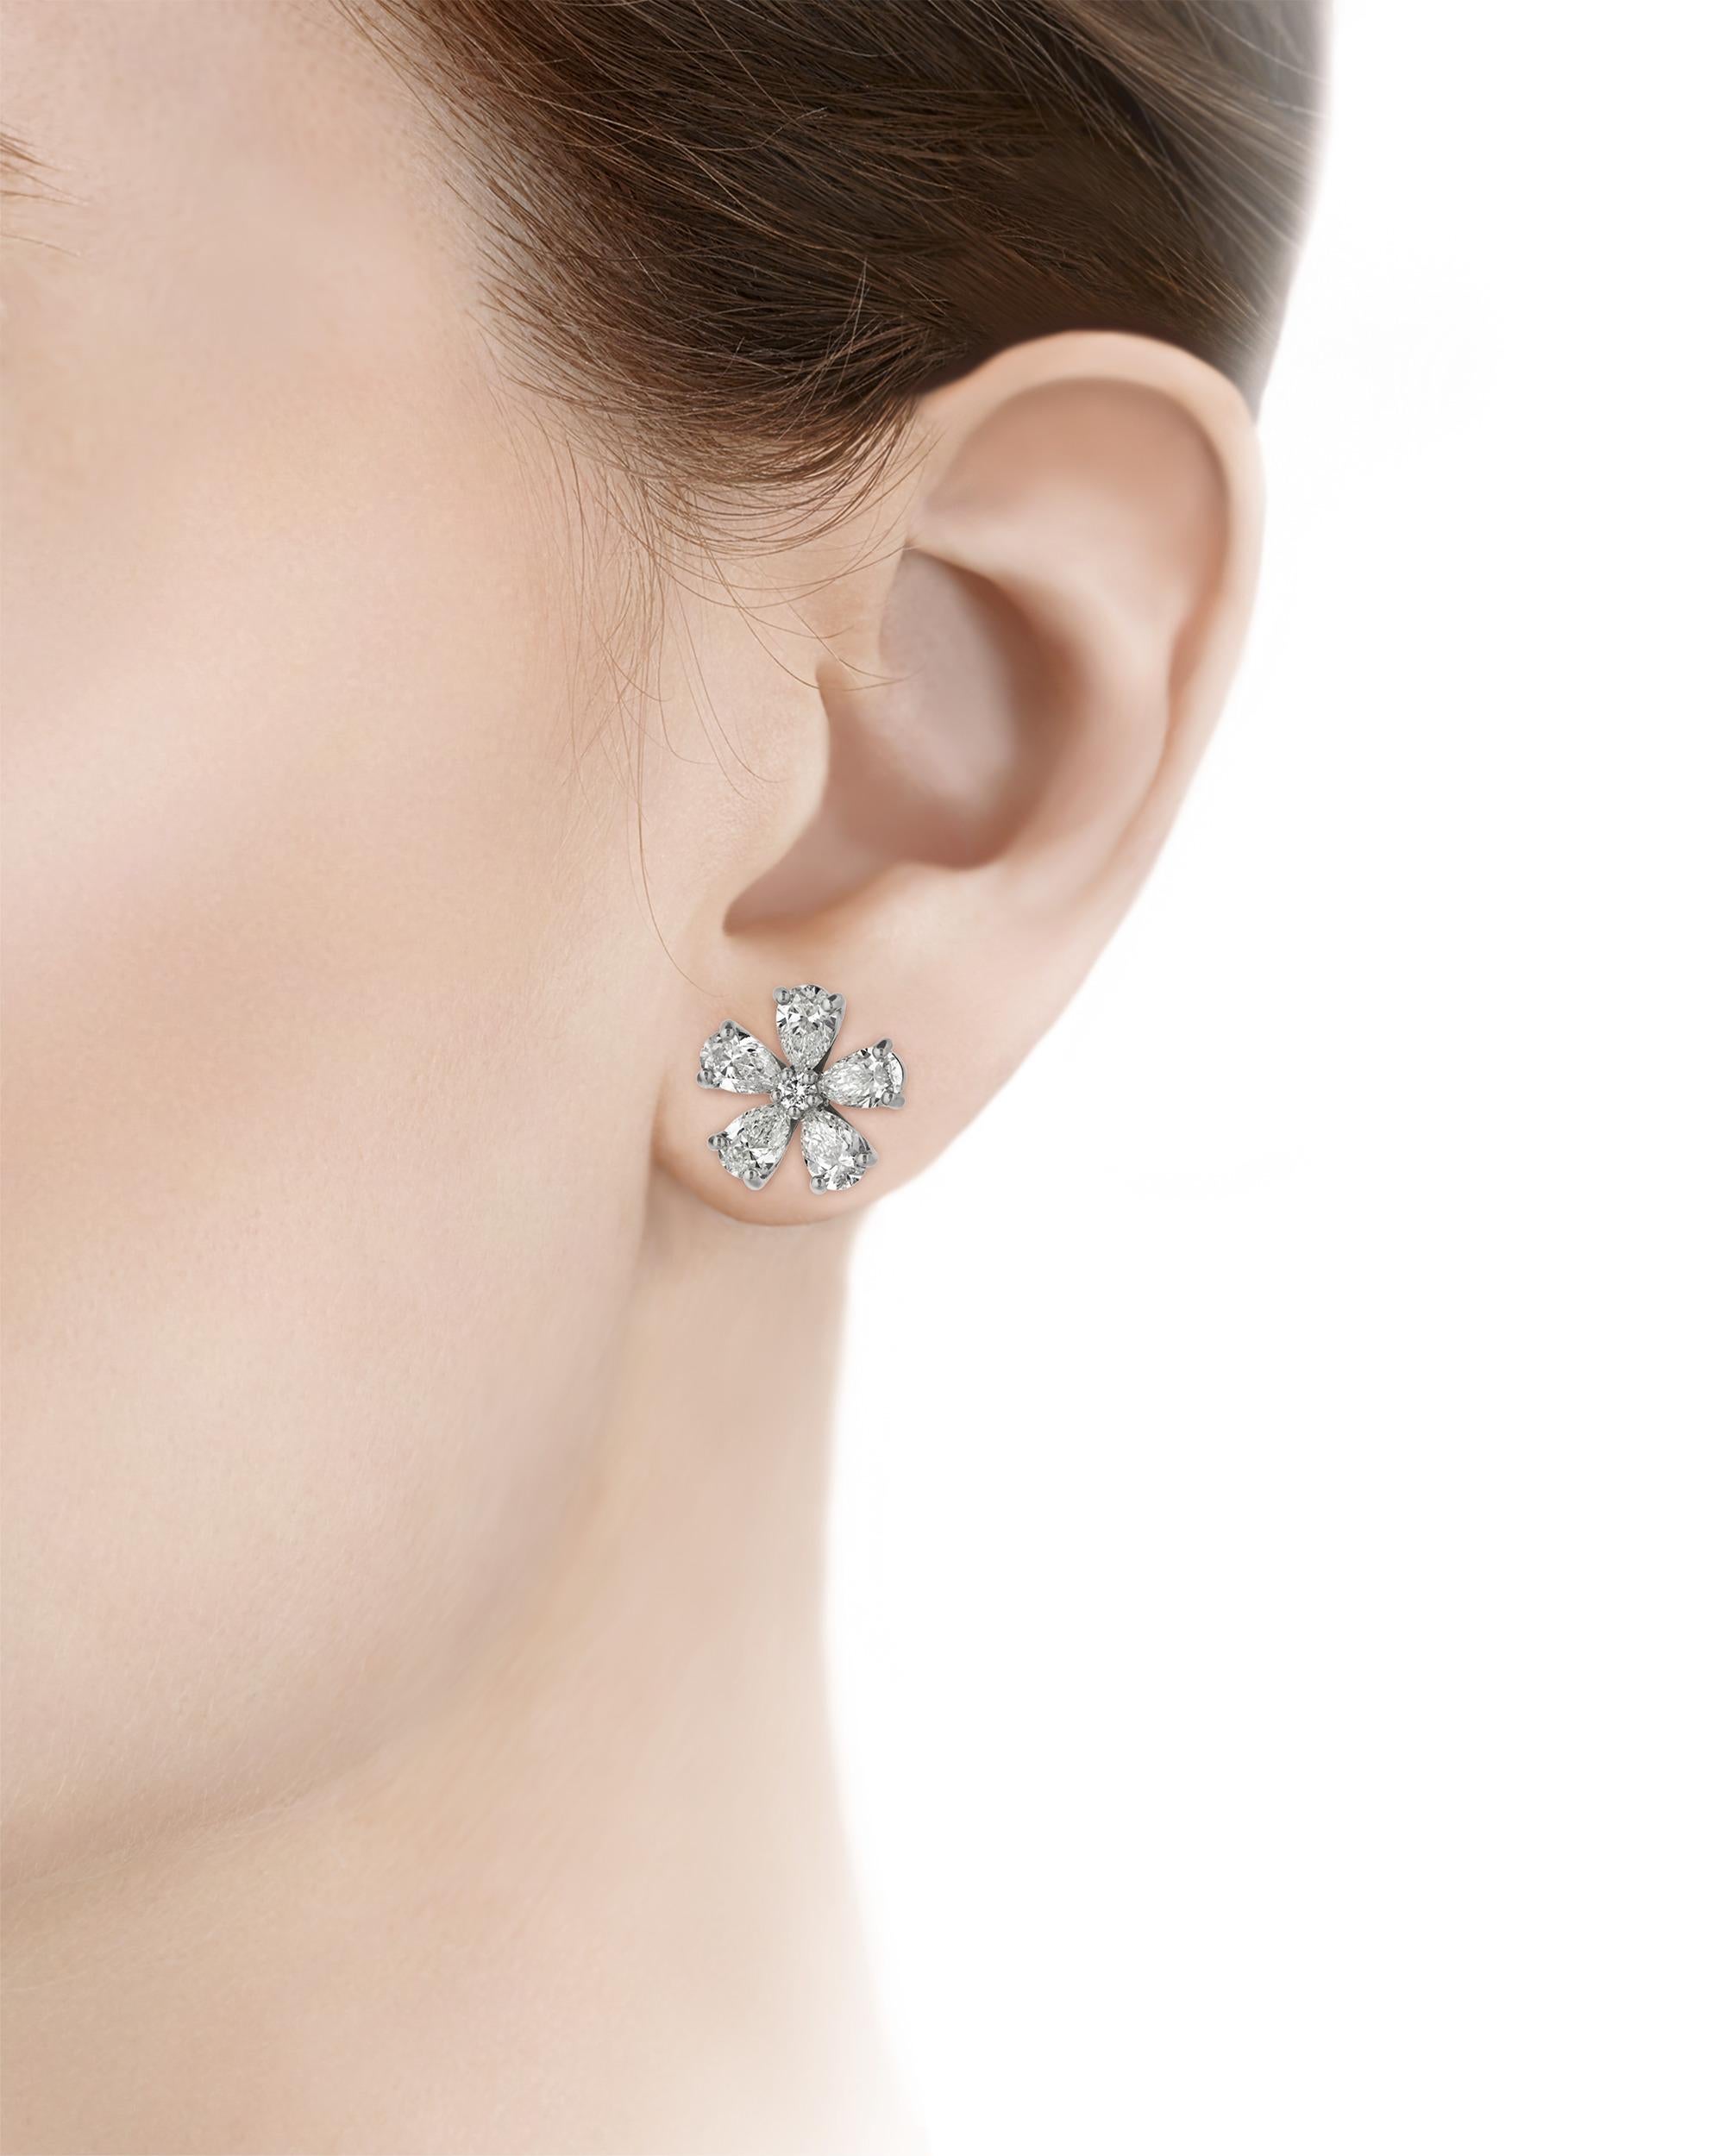 These timelessly elegant diamond earrings each feature five pear-cut diamonds arranged in a floral pattern. With a total weight of 5.08 carats, each one of these ten pear-cut diamonds is certified by the Gemological Institute of America for their